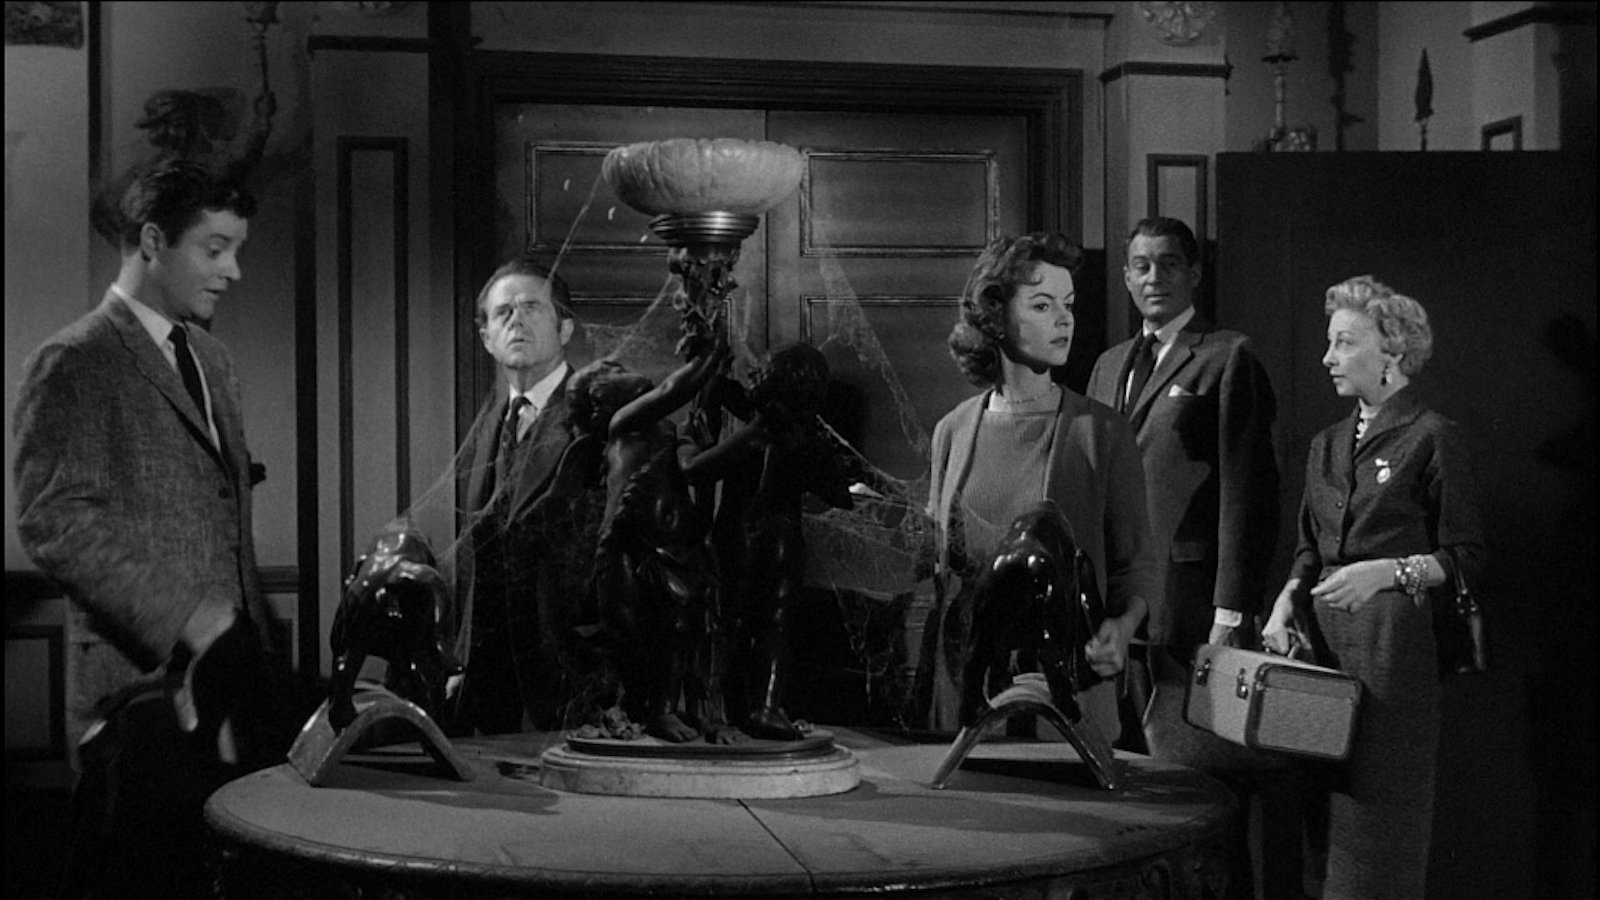 Five people stand in a dark room in an old house with cobwebs in a black and white image